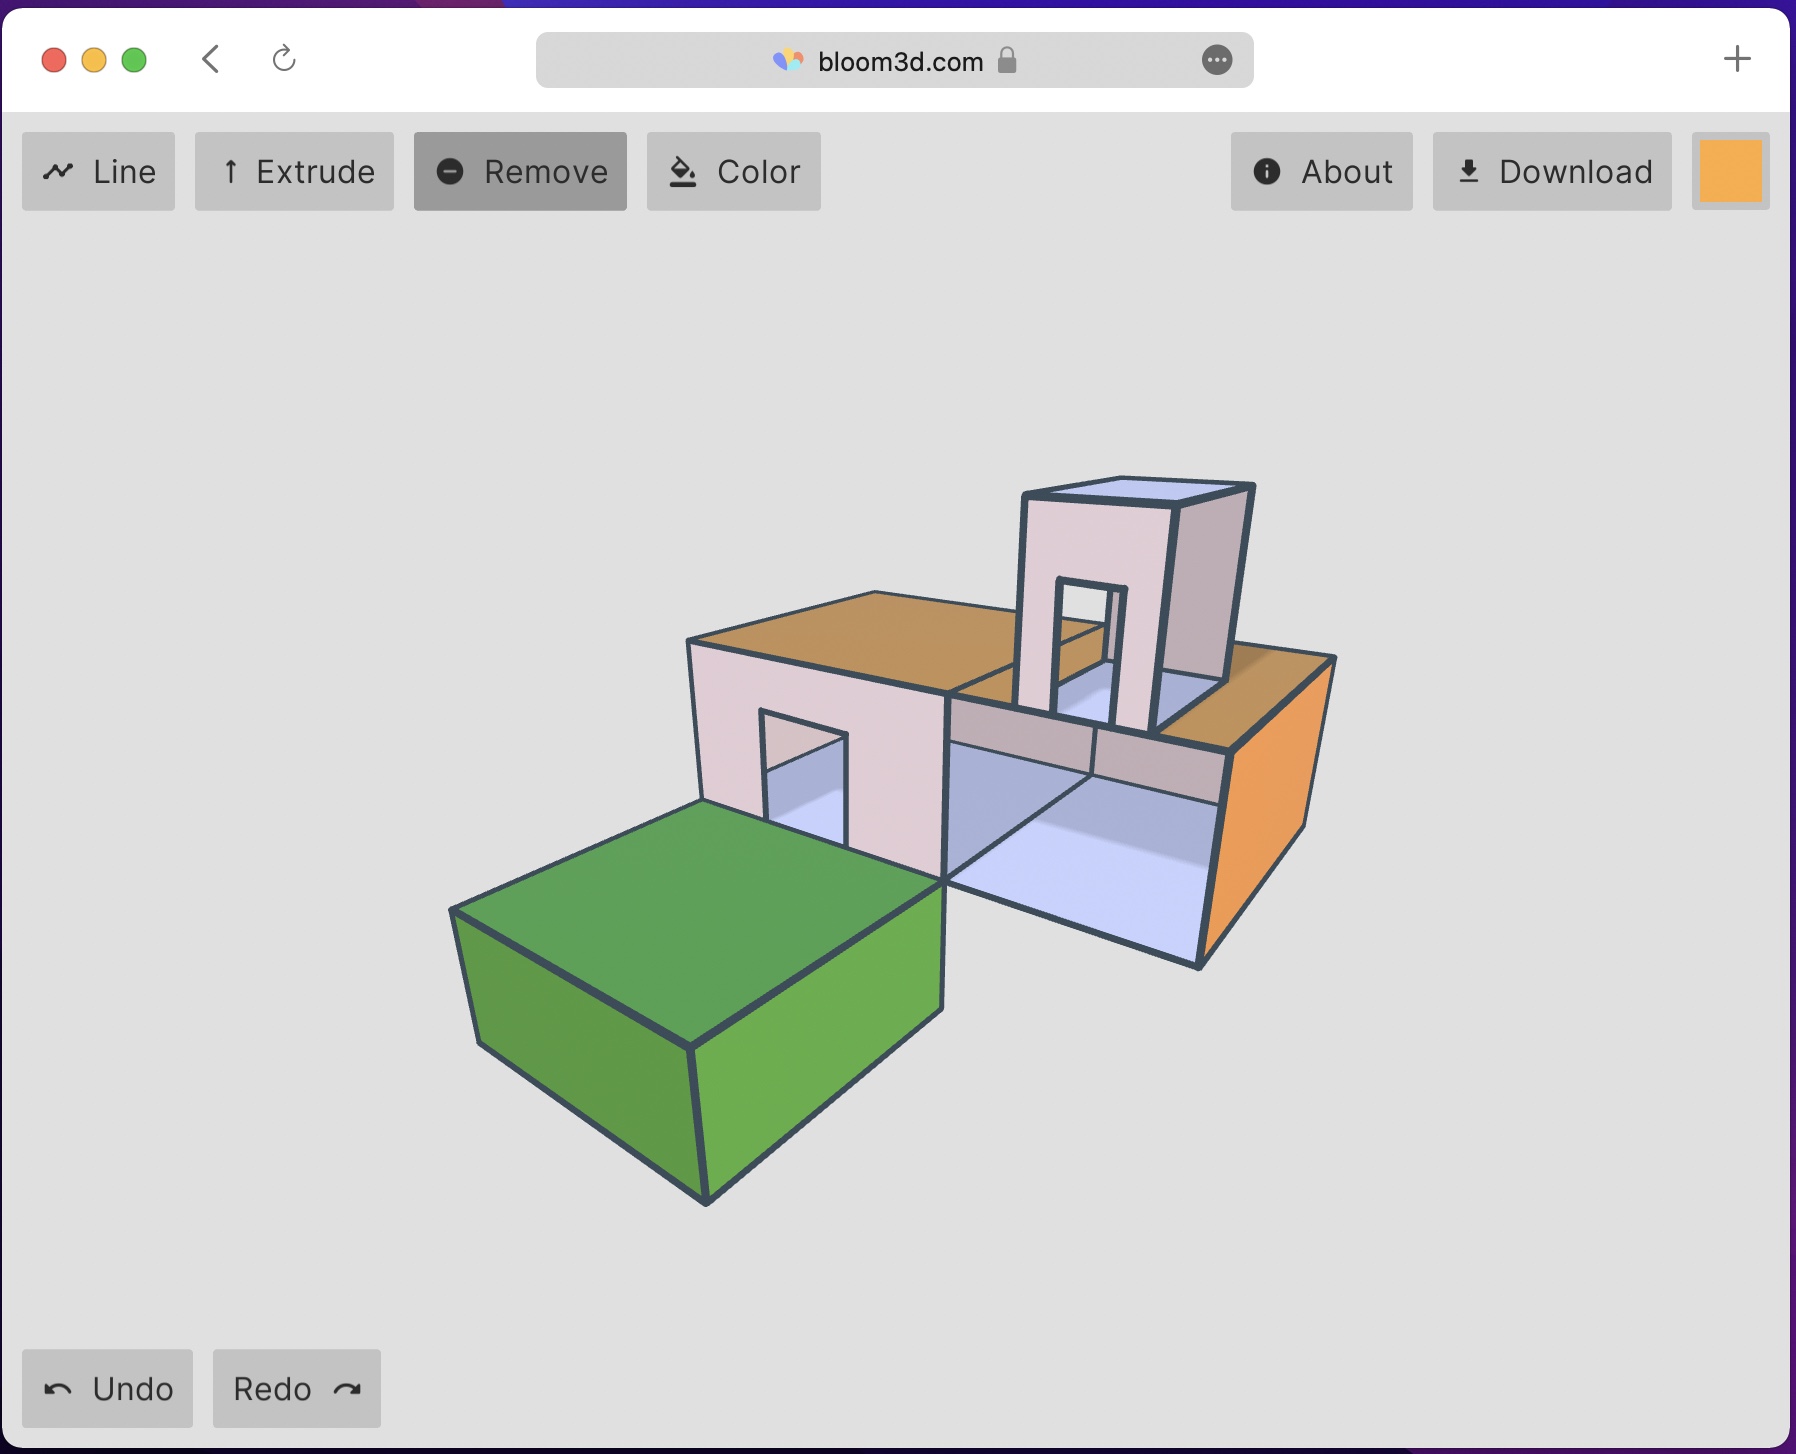 A screenshot of Bloom3D's interface and a simple low-polygon building.